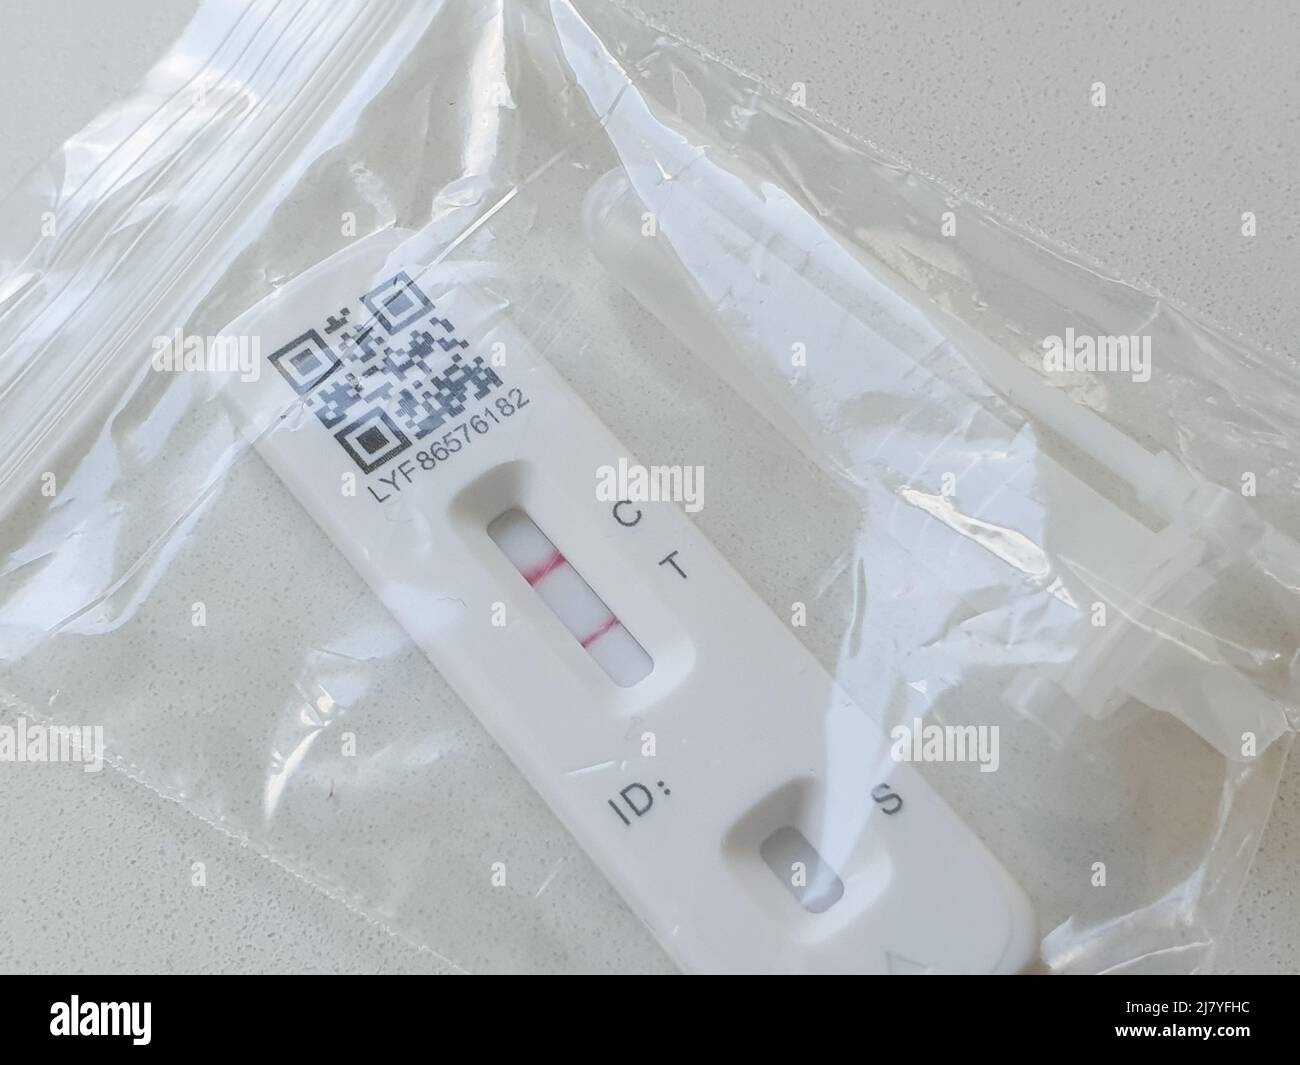 A lateral flow test positive for covid. The rapid antigen test is in a plastic bag with the swab and extraction buffer tube, ready for disposal. Stock Photo